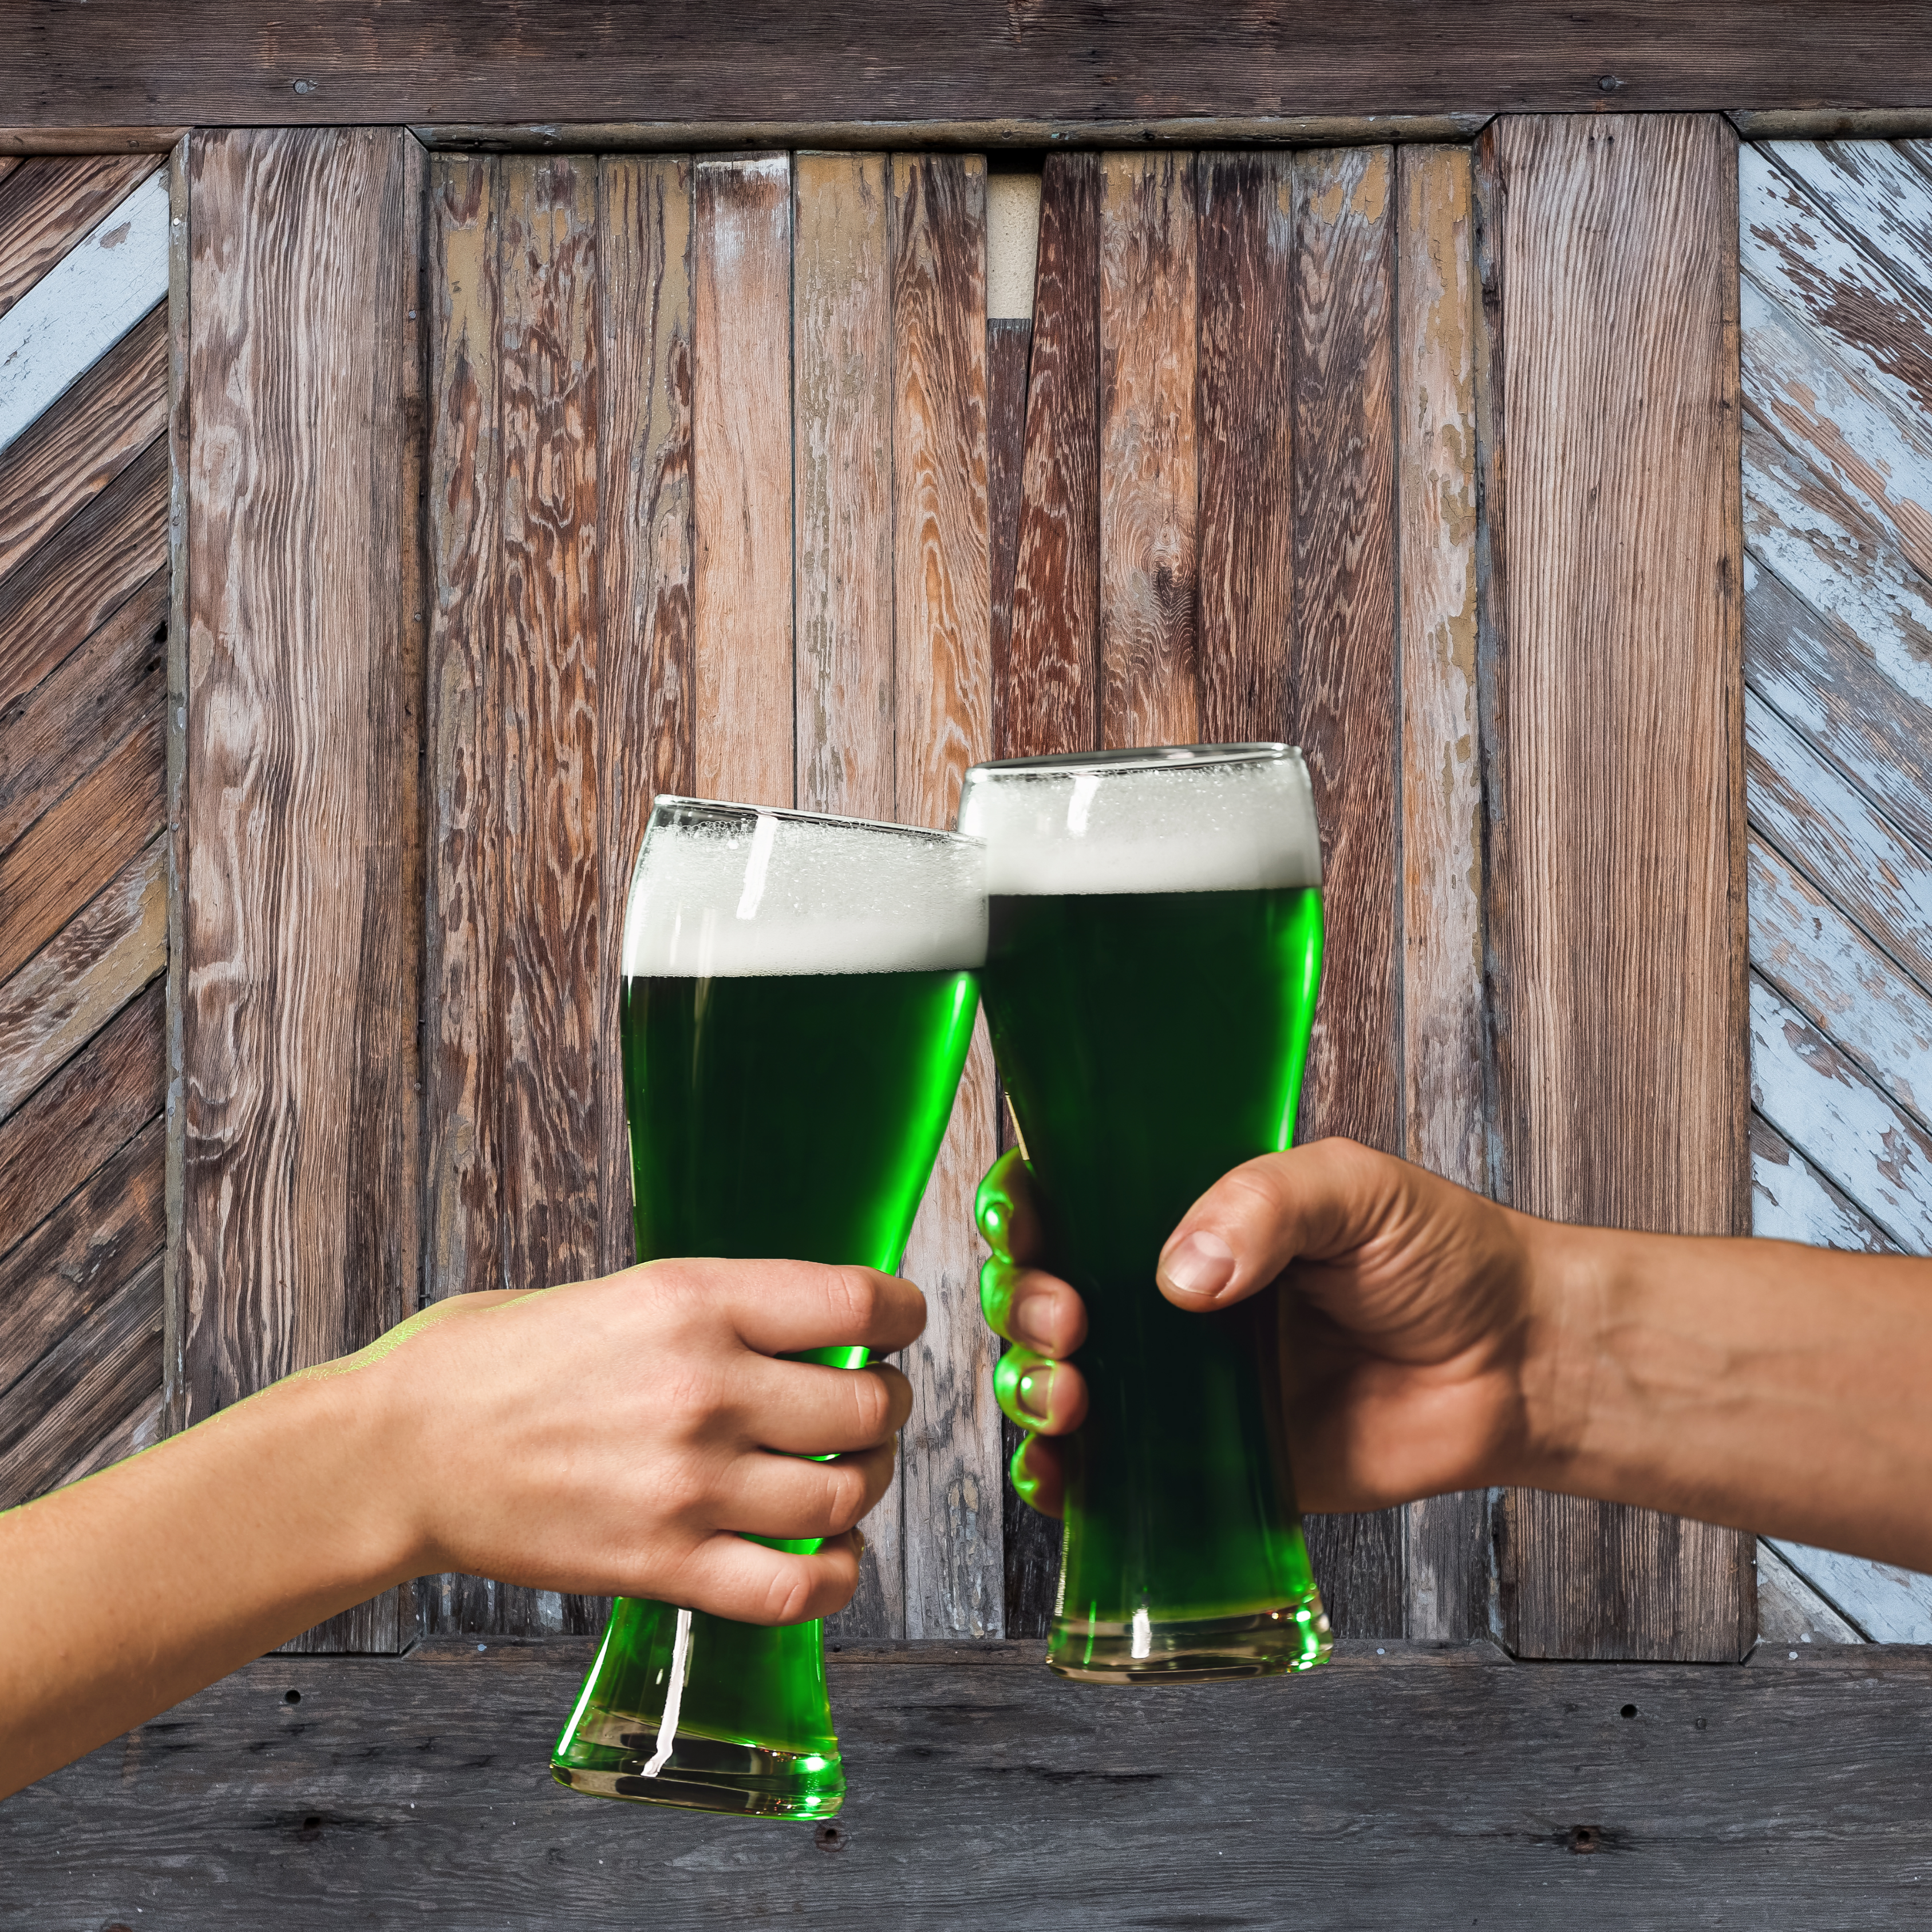 Two people cheering with green beer in their hands near a reclaimed wood wall or barn door